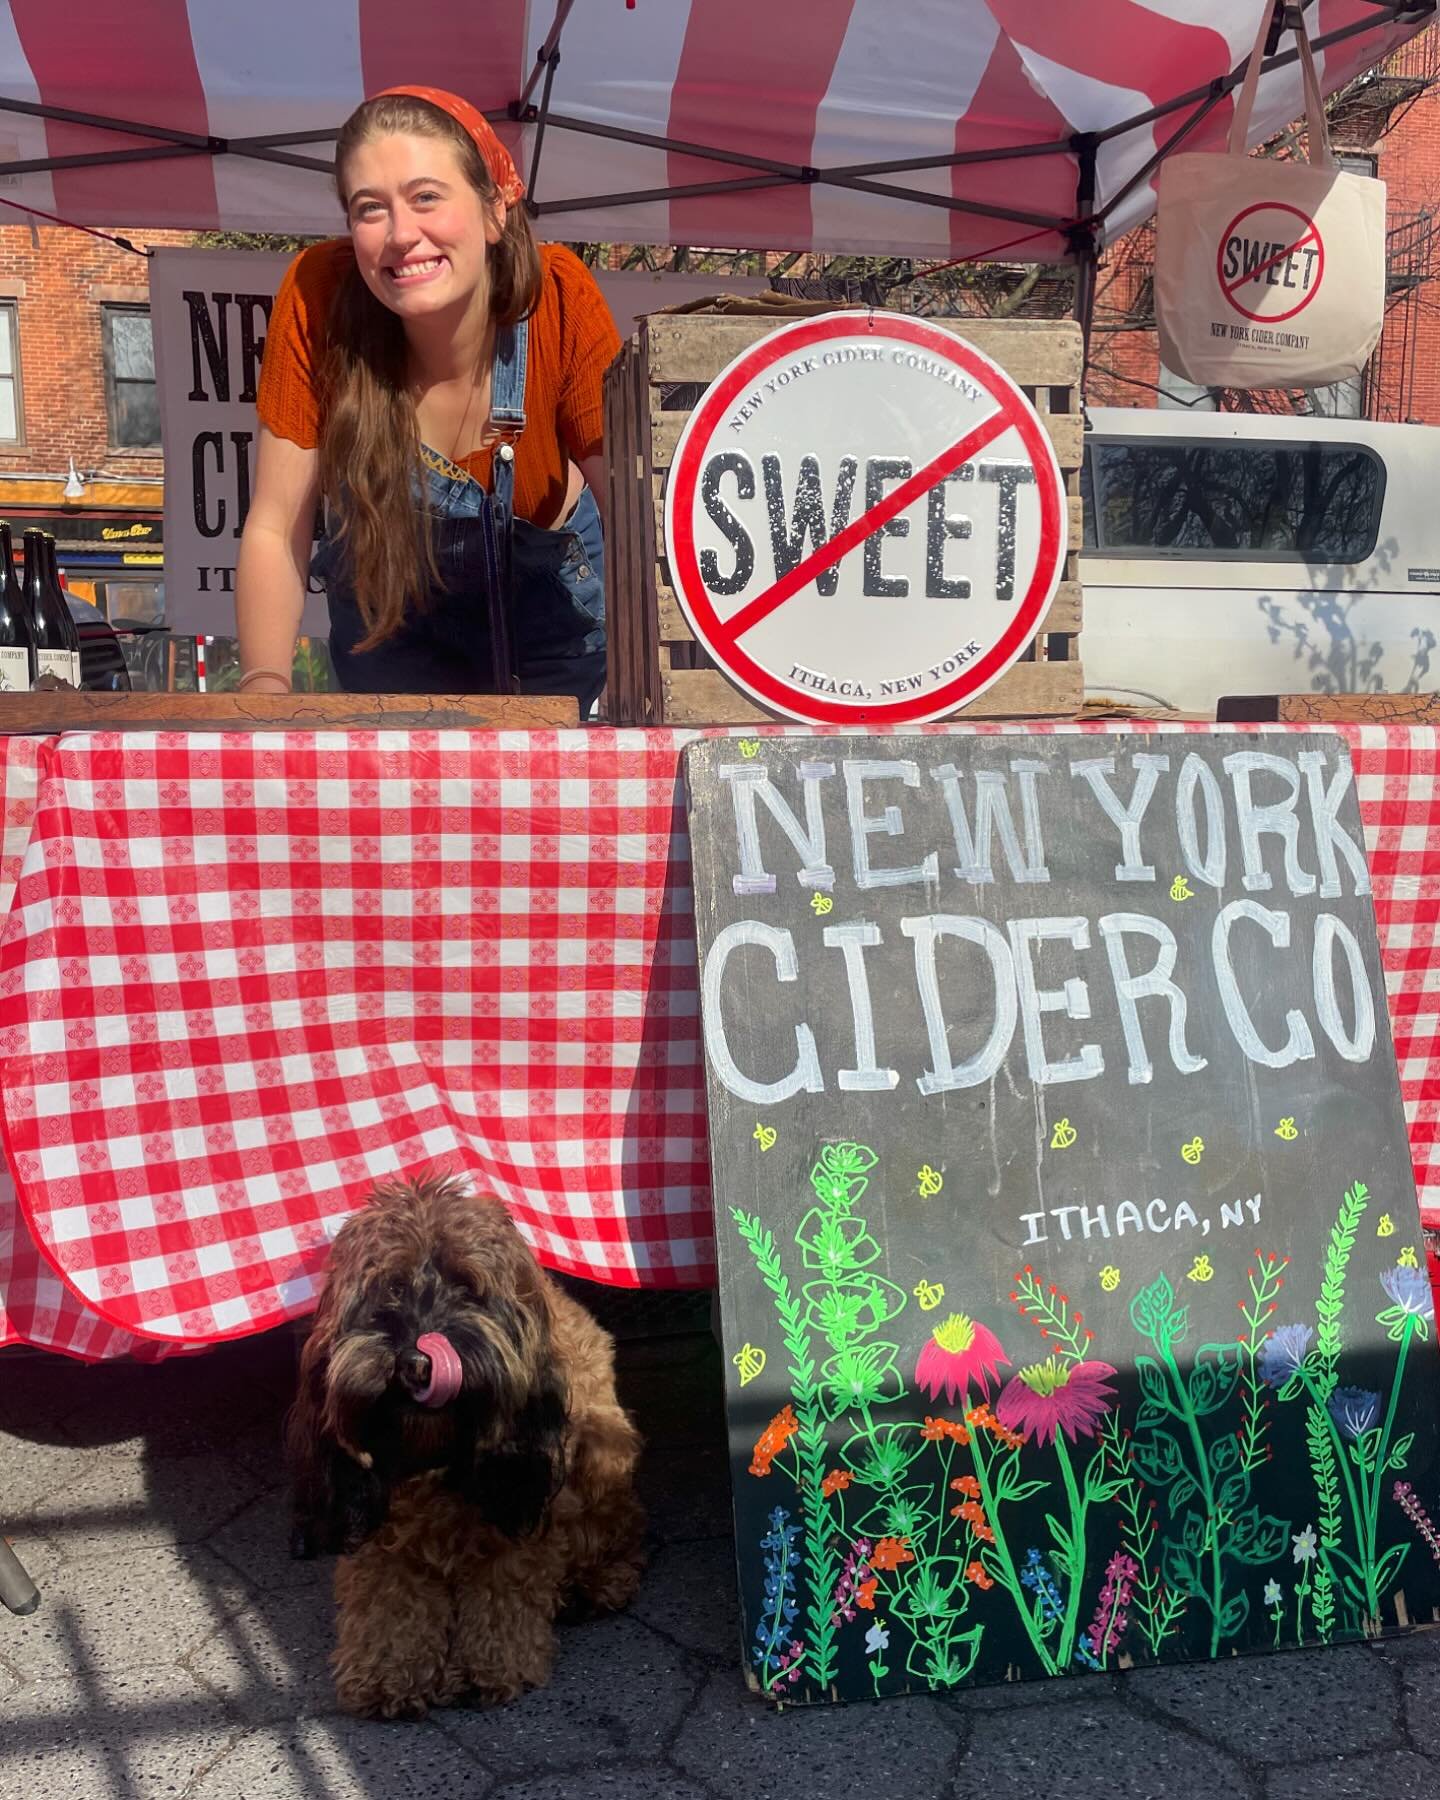 It&rsquo;s it&rsquo;s bring your child to work day! Come, see Eve for your dry cider needs and meet wee Junie B. Jones!  Tompkins Square Park Greenmarket, East Village, Manhattan.